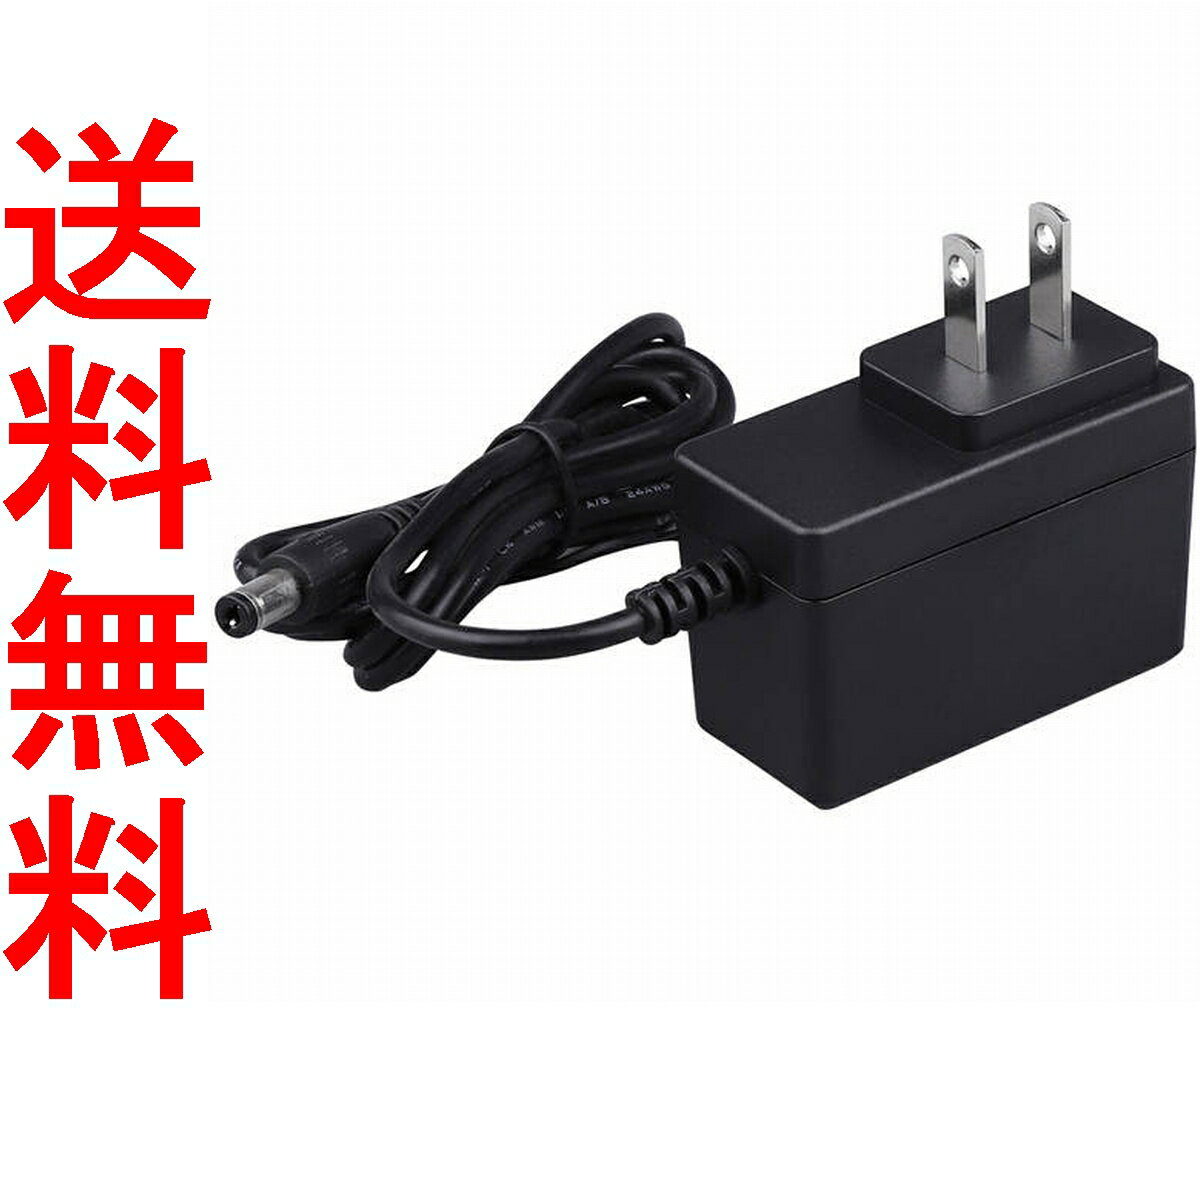 <strong>オムロン</strong> 血圧計用 電源 ACアダプター 互換品 AAA-AC6-OM 6V OMRON HCR-7104 HCR-7106 HCR-7202 <strong>HEM-1000</strong> HEM-7120 HEM-1021 HHP-AM01 HEM-AC-W5J HEM-AC-N PSE適合 コード長150cm